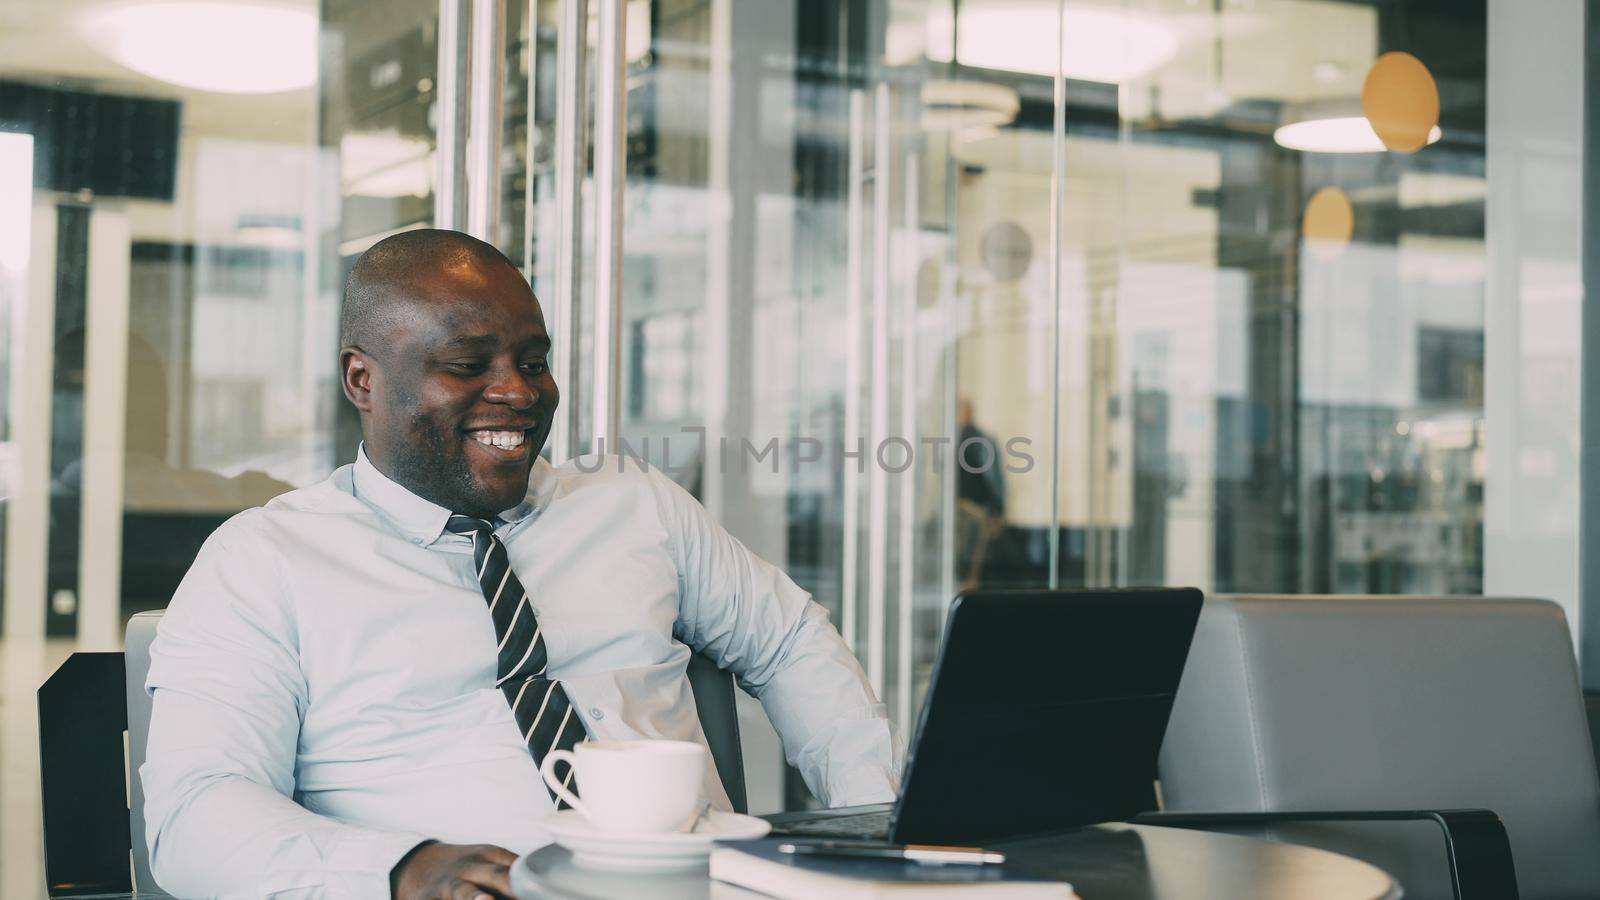 Cheery African American businessman smiling, printing and working on his laptop in glassy cafe during lunch break. by silverkblack